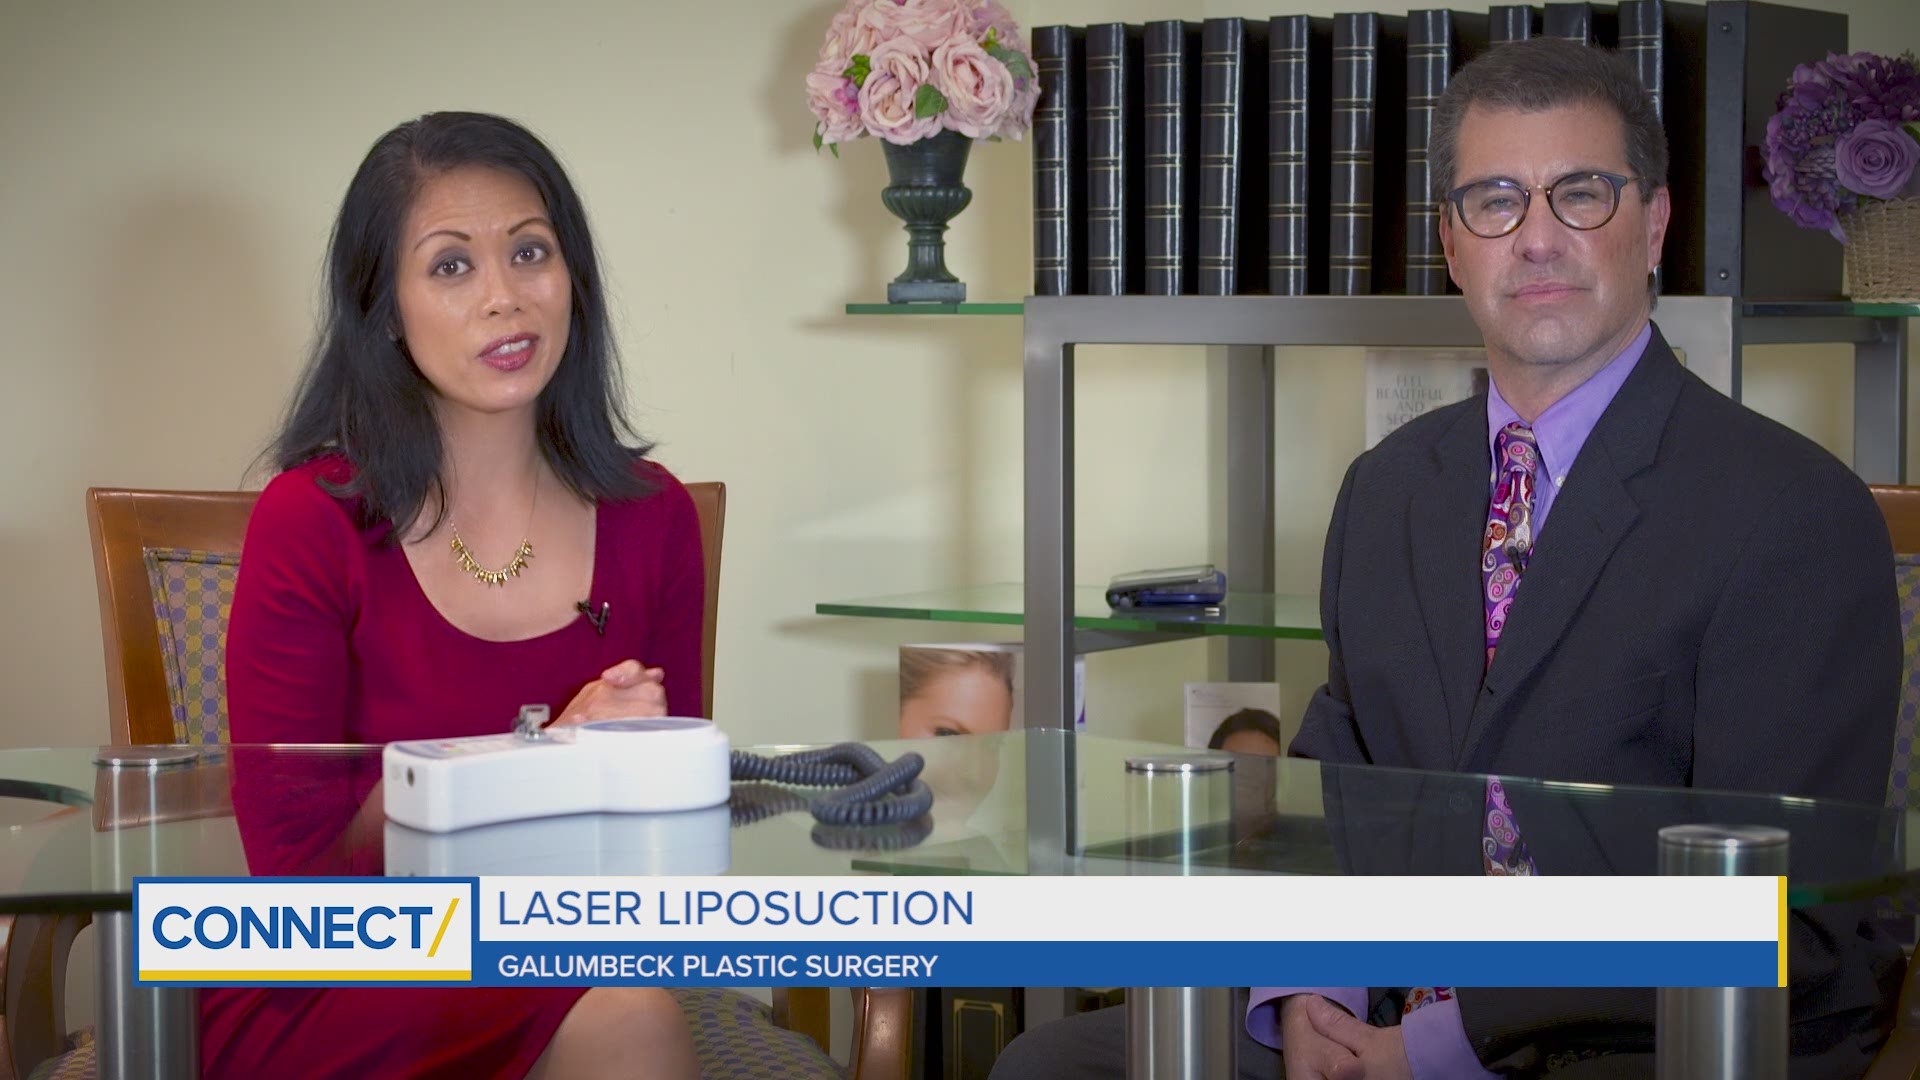 We spoke with Dr. Galumbeck about a type of liposuction that leaves patients with less pain, less swelling, and a shorter recovery period than traditional liposuction.